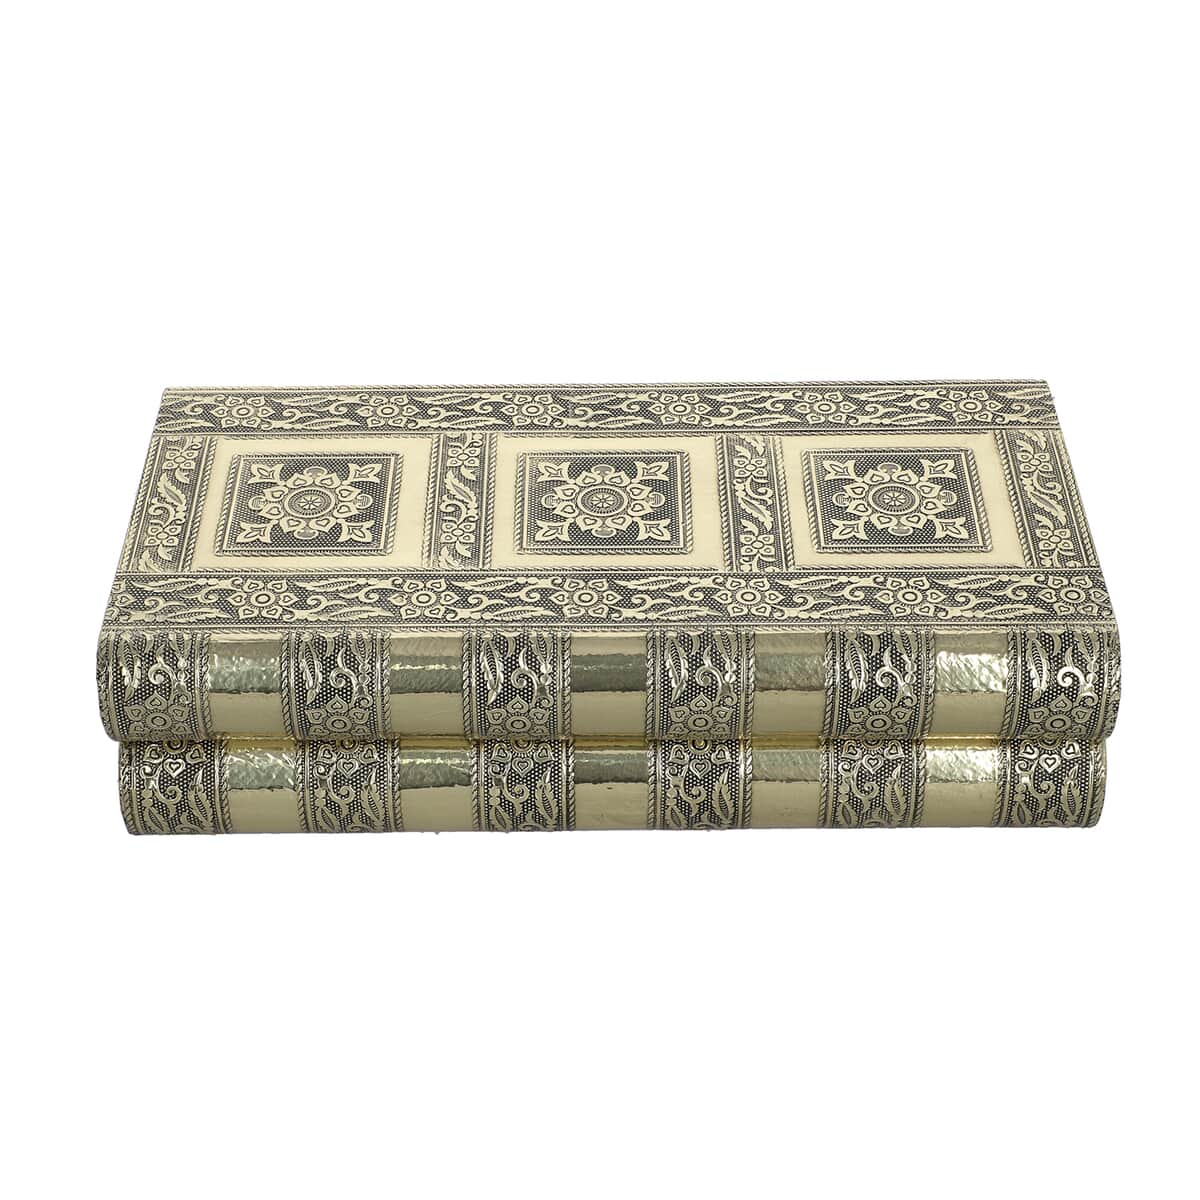 Handmade Gold Color Aluminum Oxidized Jewelry Box (11"x5"x3") image number 2